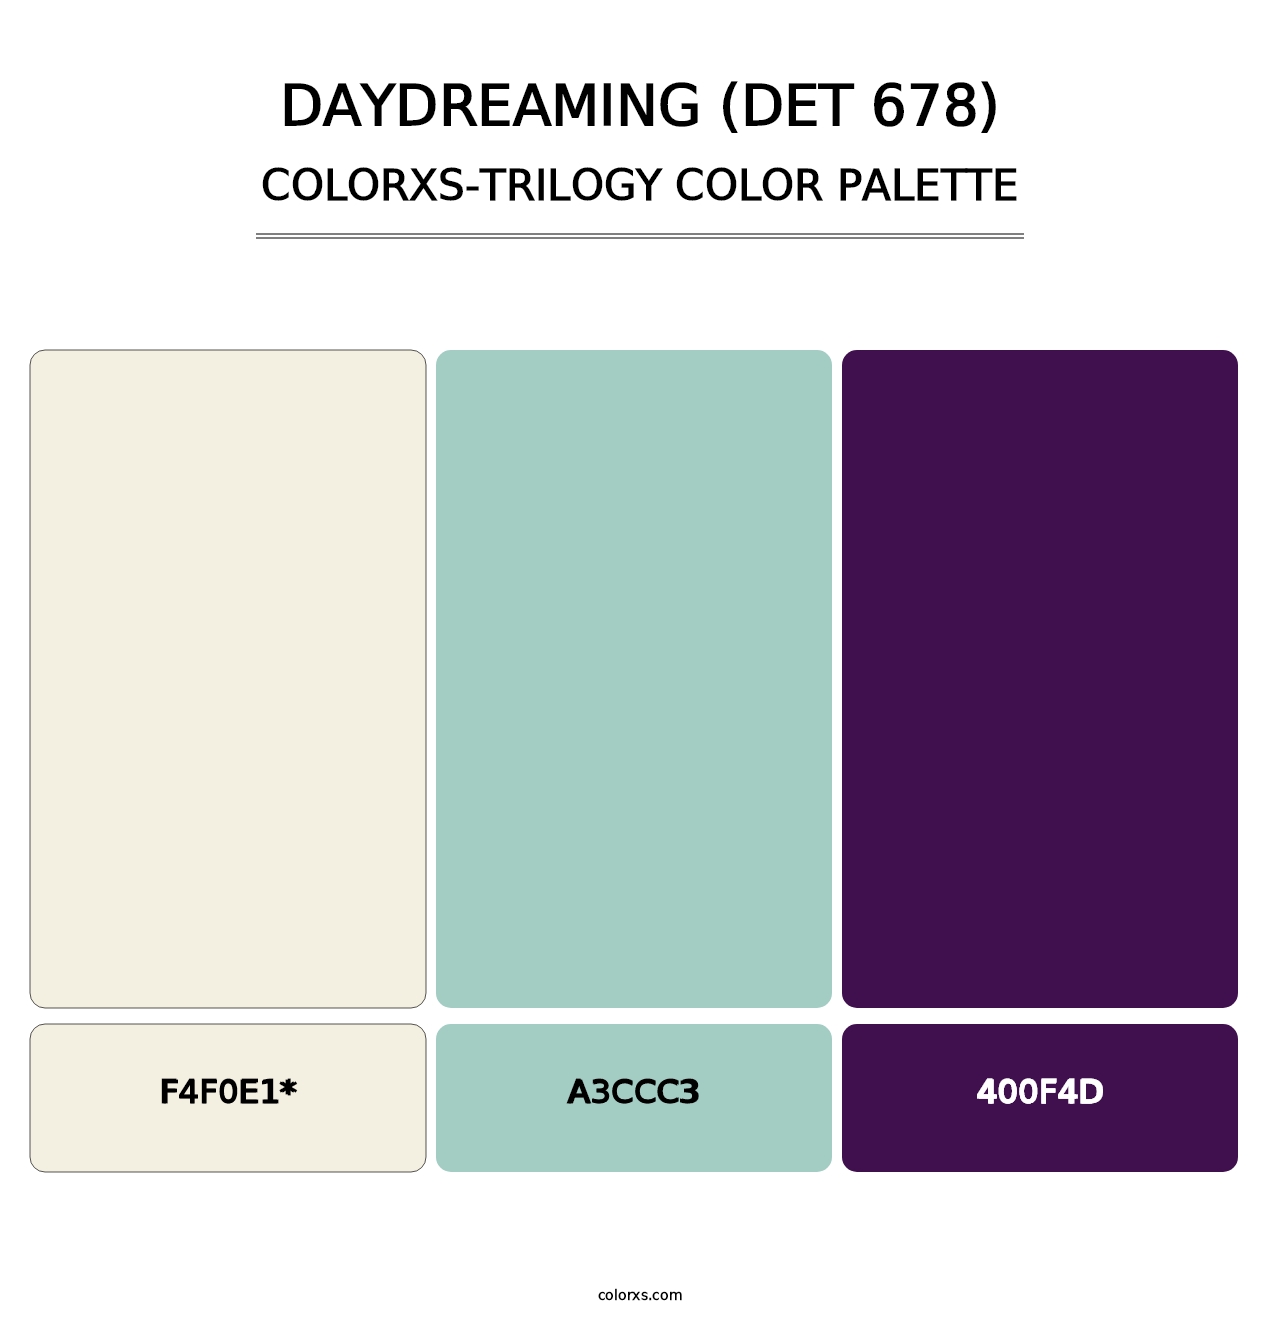 Daydreaming (DET 678) - Colorxs Trilogy Palette